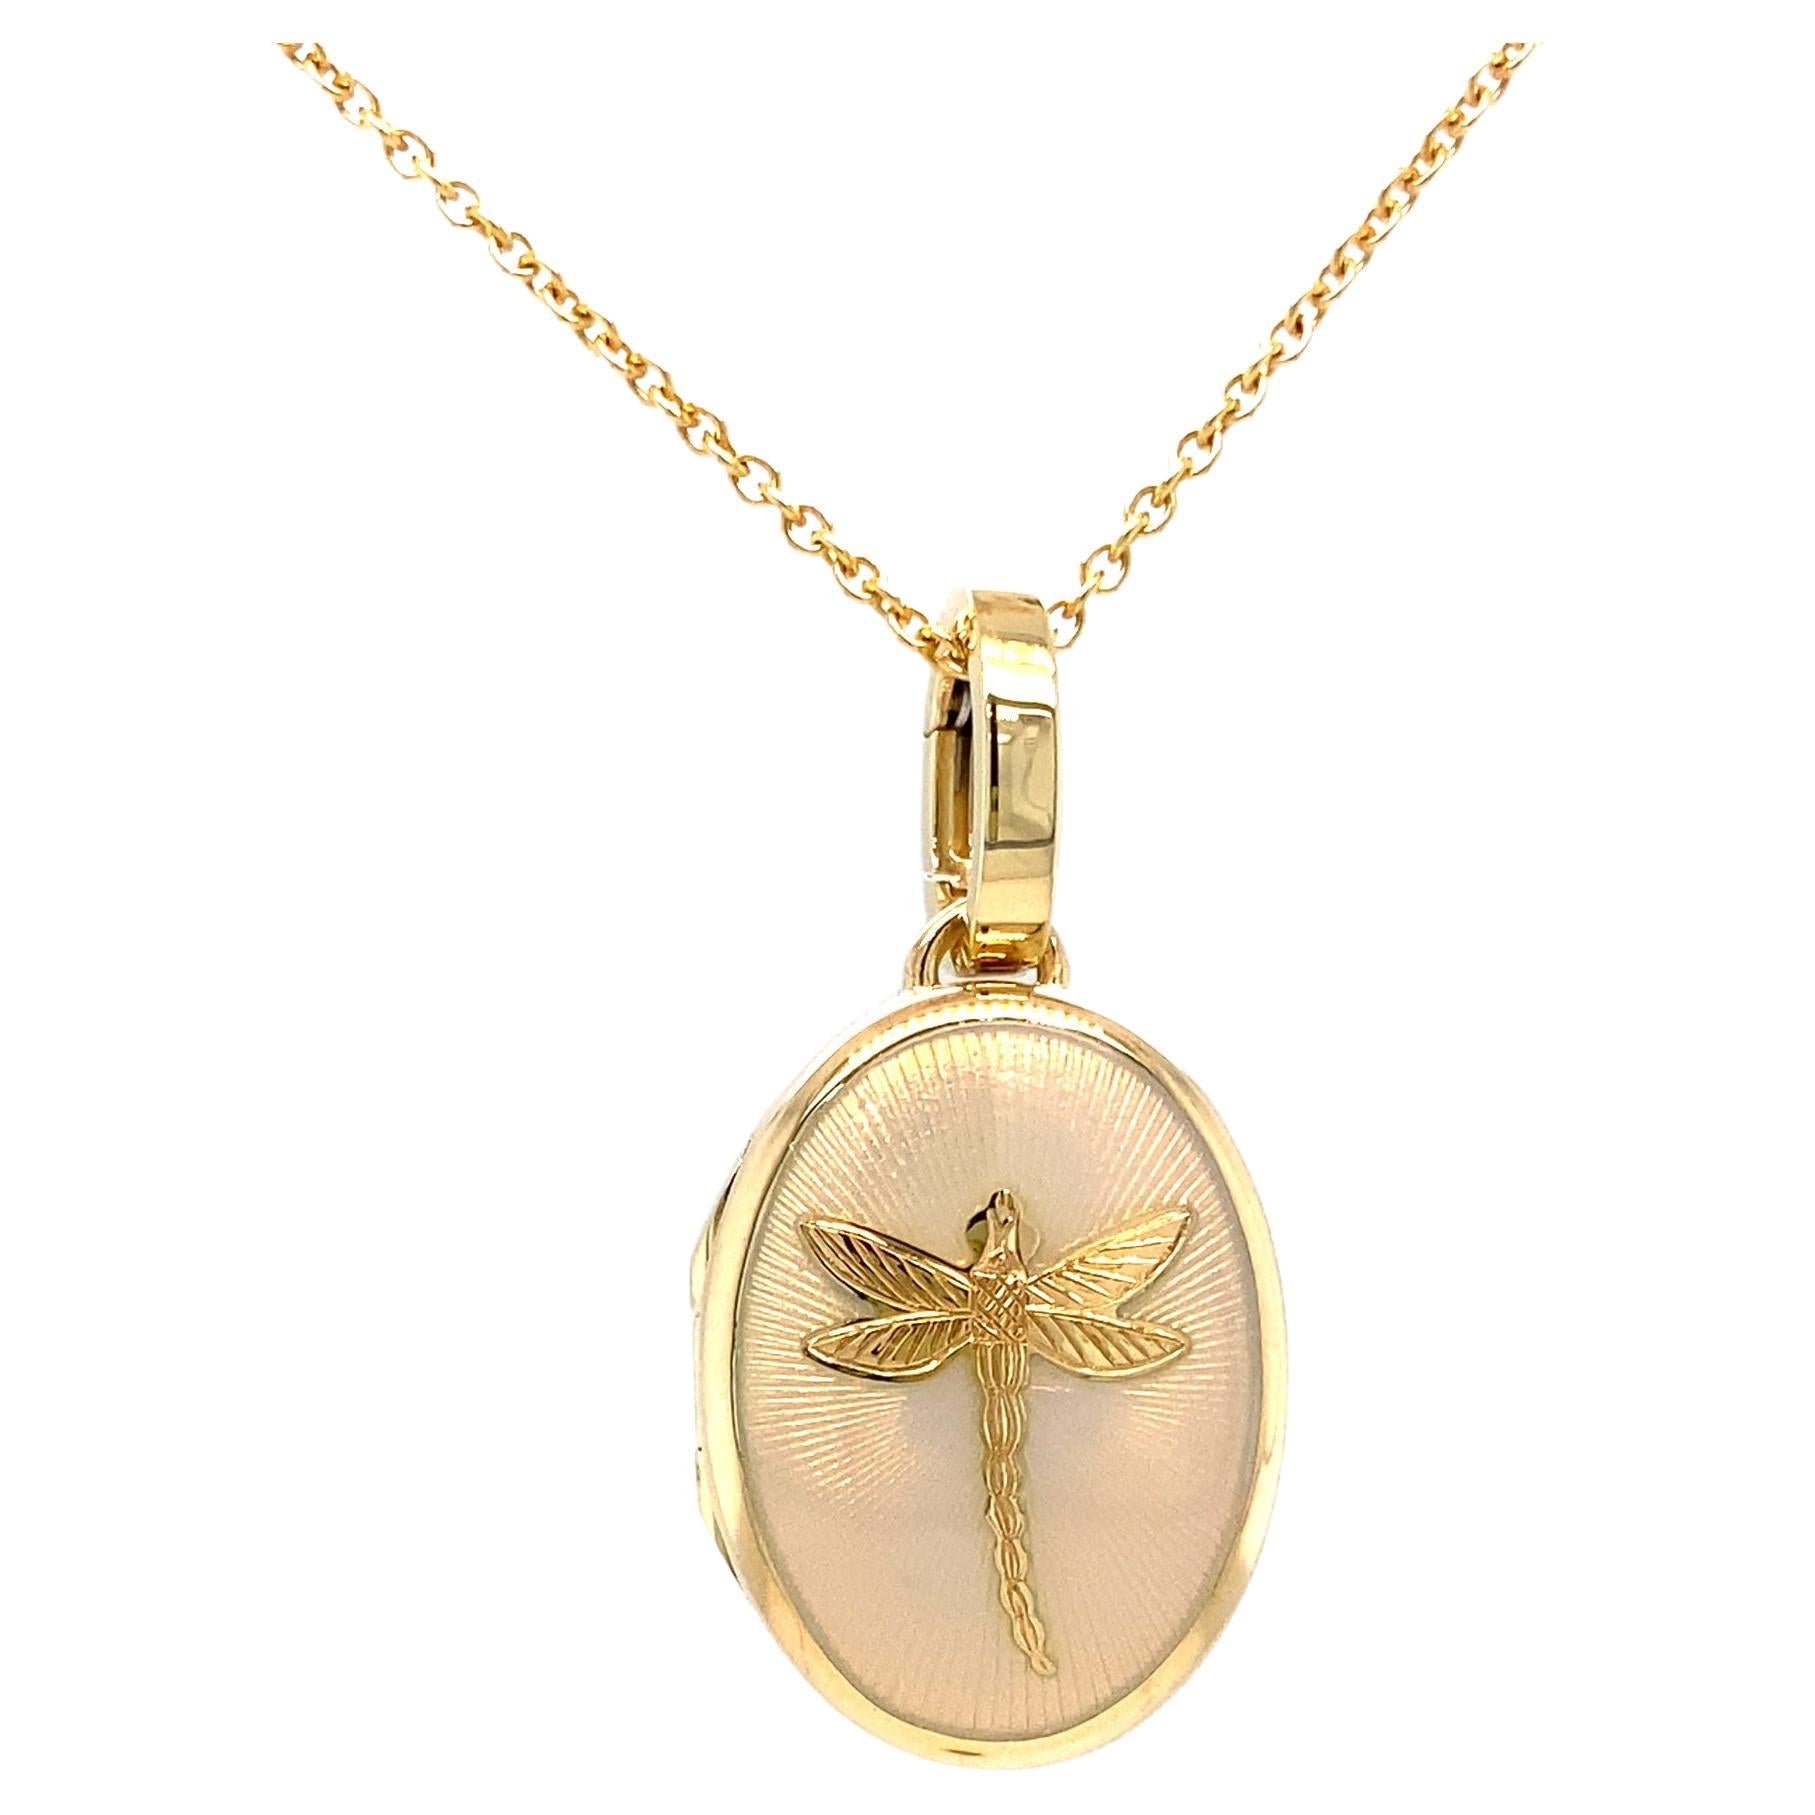 Oval Locket Pendant Necklace Dragonfly 18k Yellow Gold White Guilloche Enamel For Sale